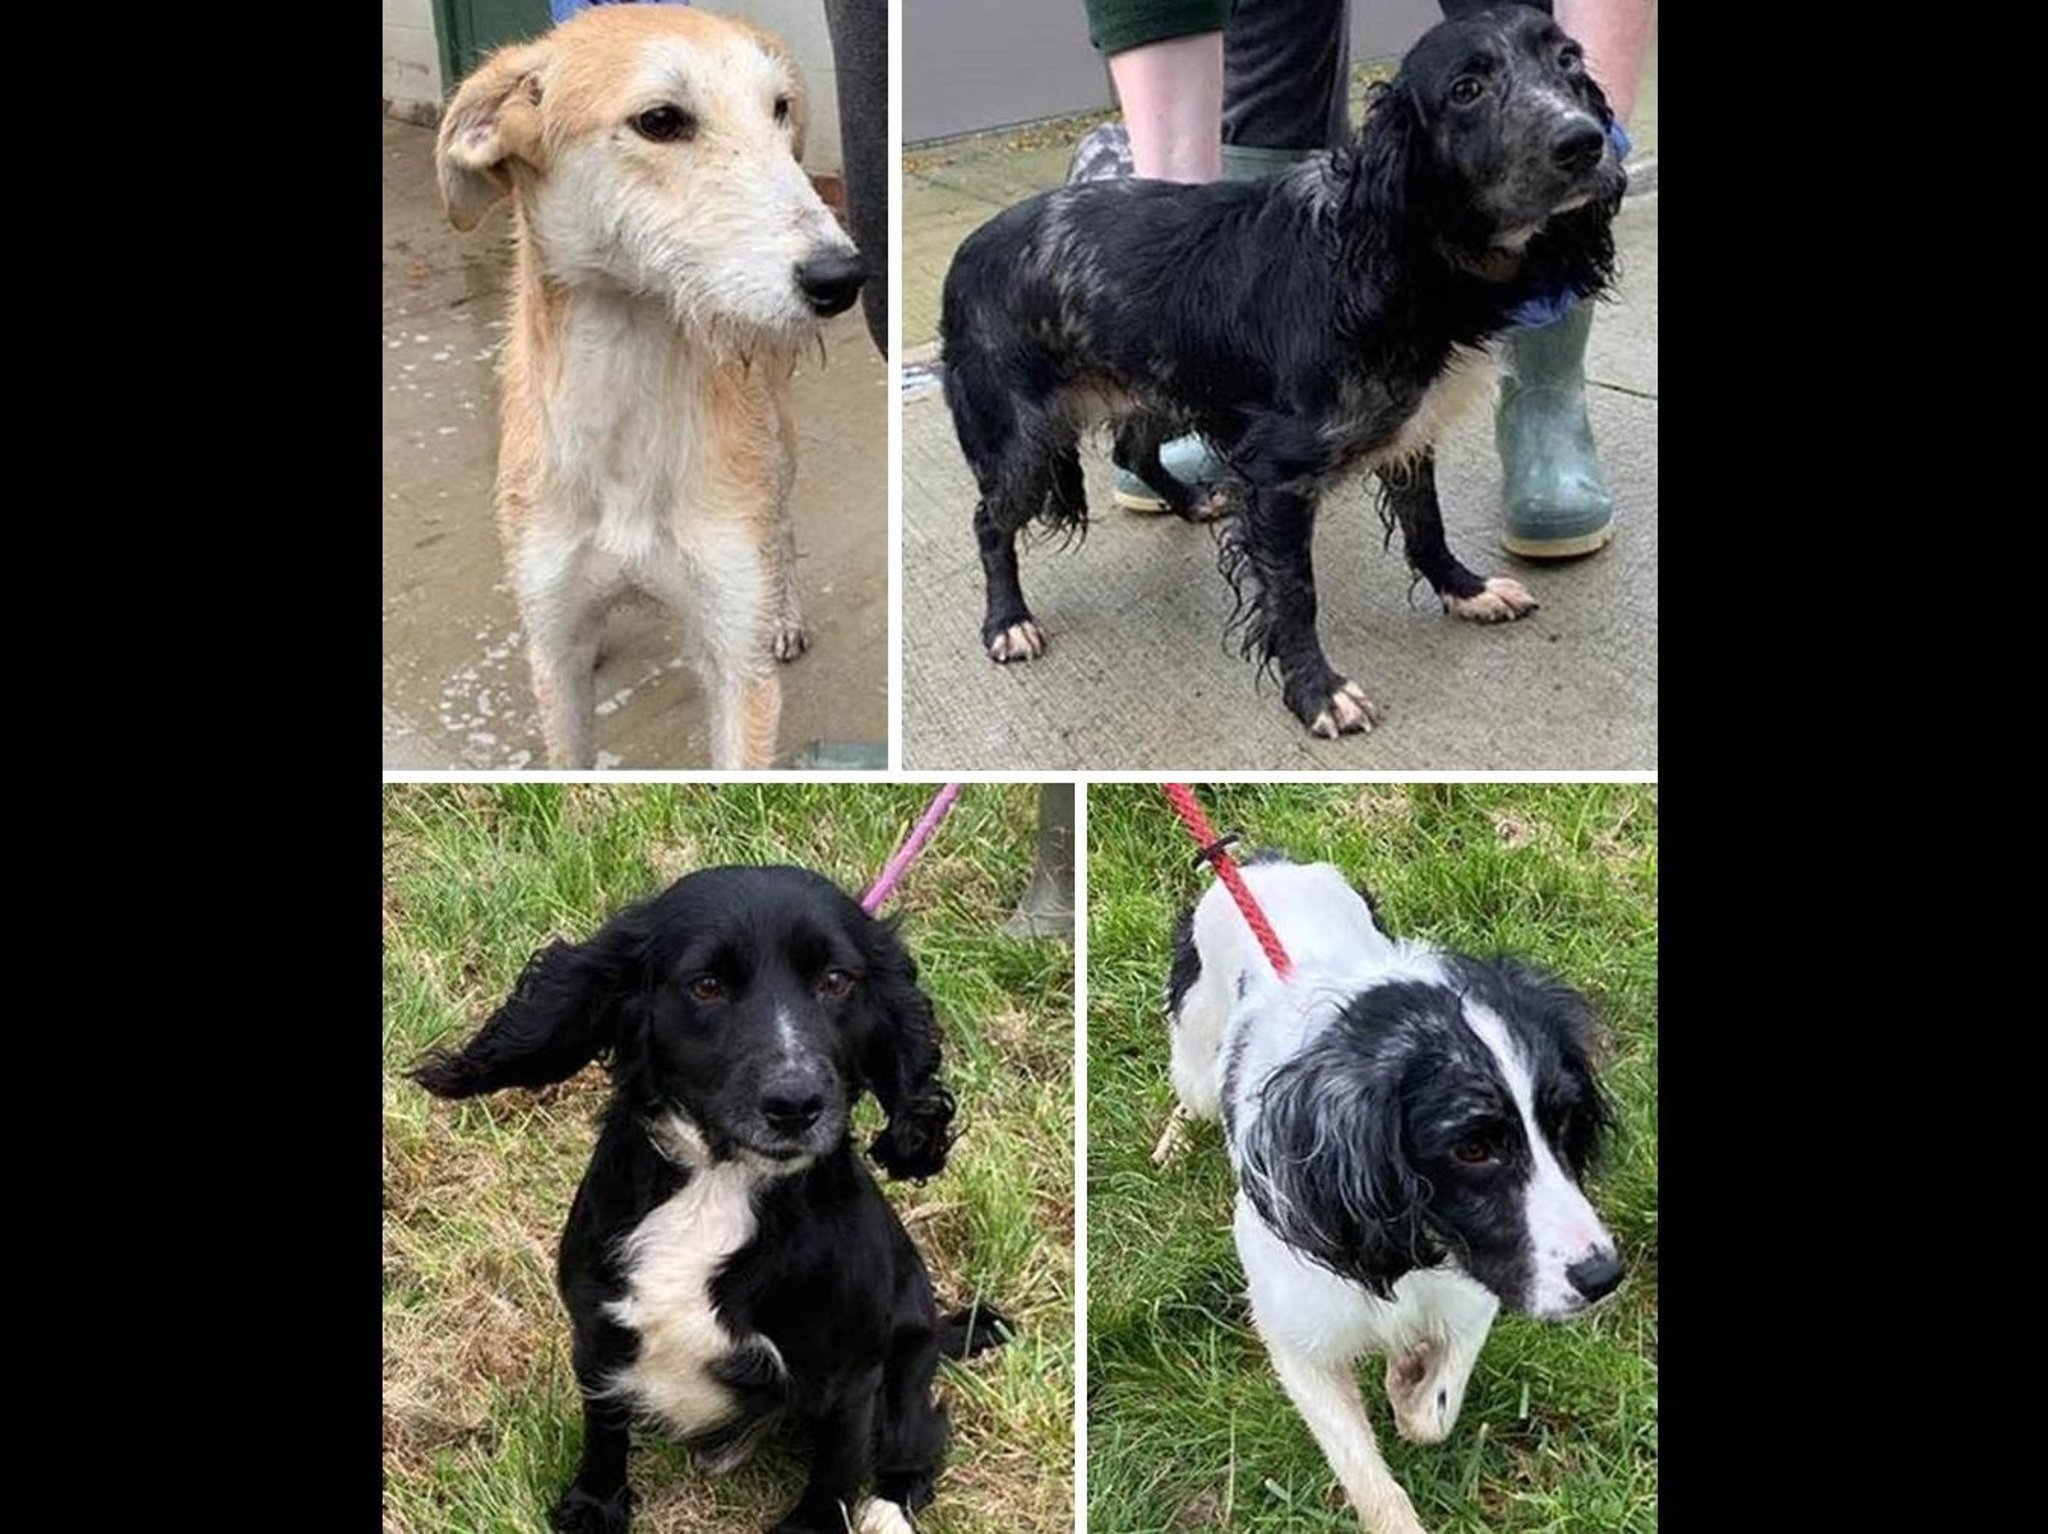 Do you recognise these 4 dogs believed to have been stolen